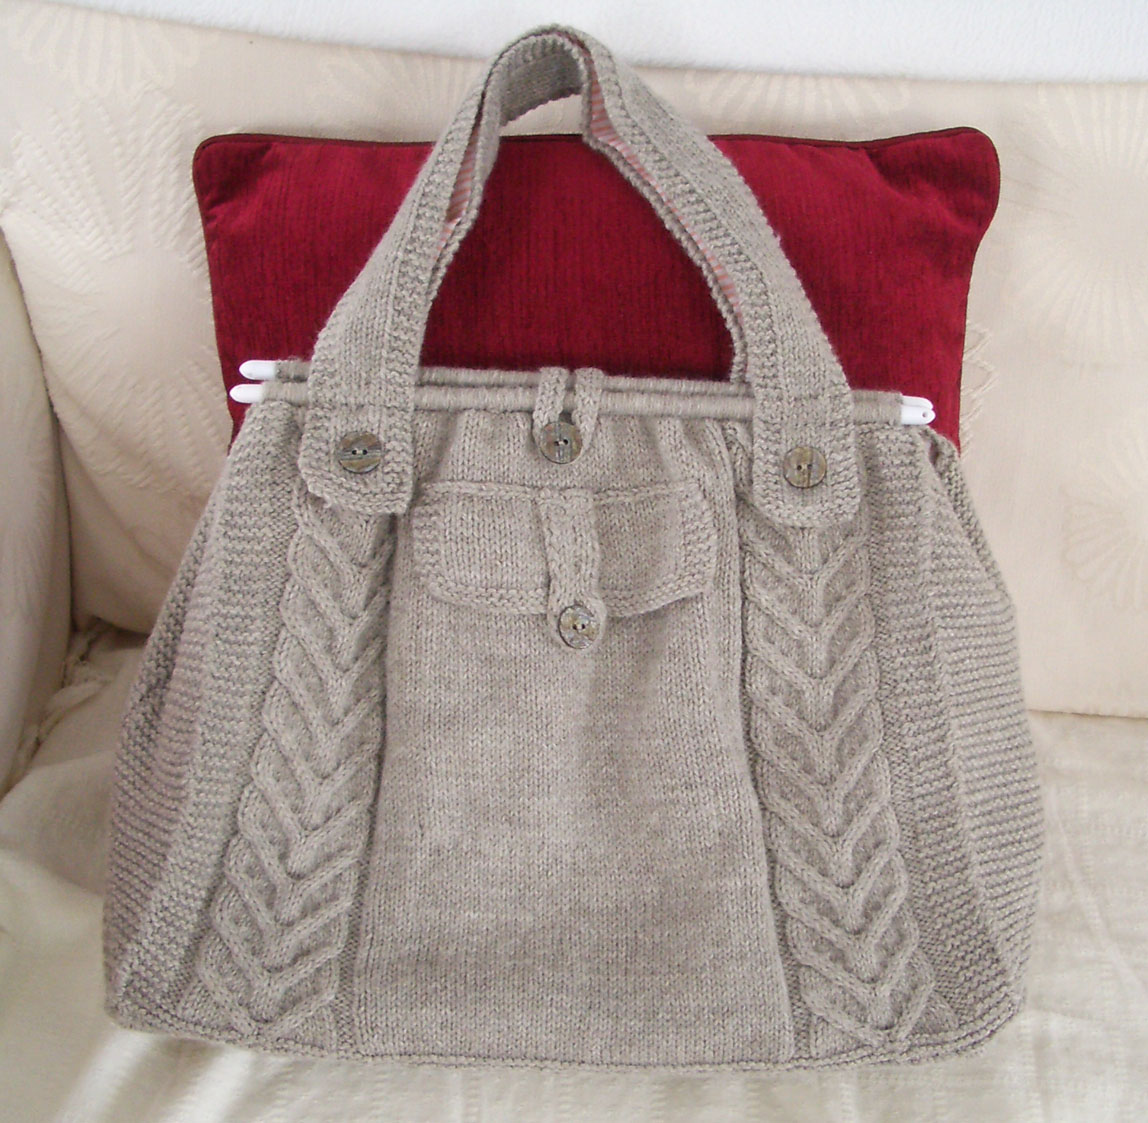 Purse Knitting Patterns | In the Loop Knitting